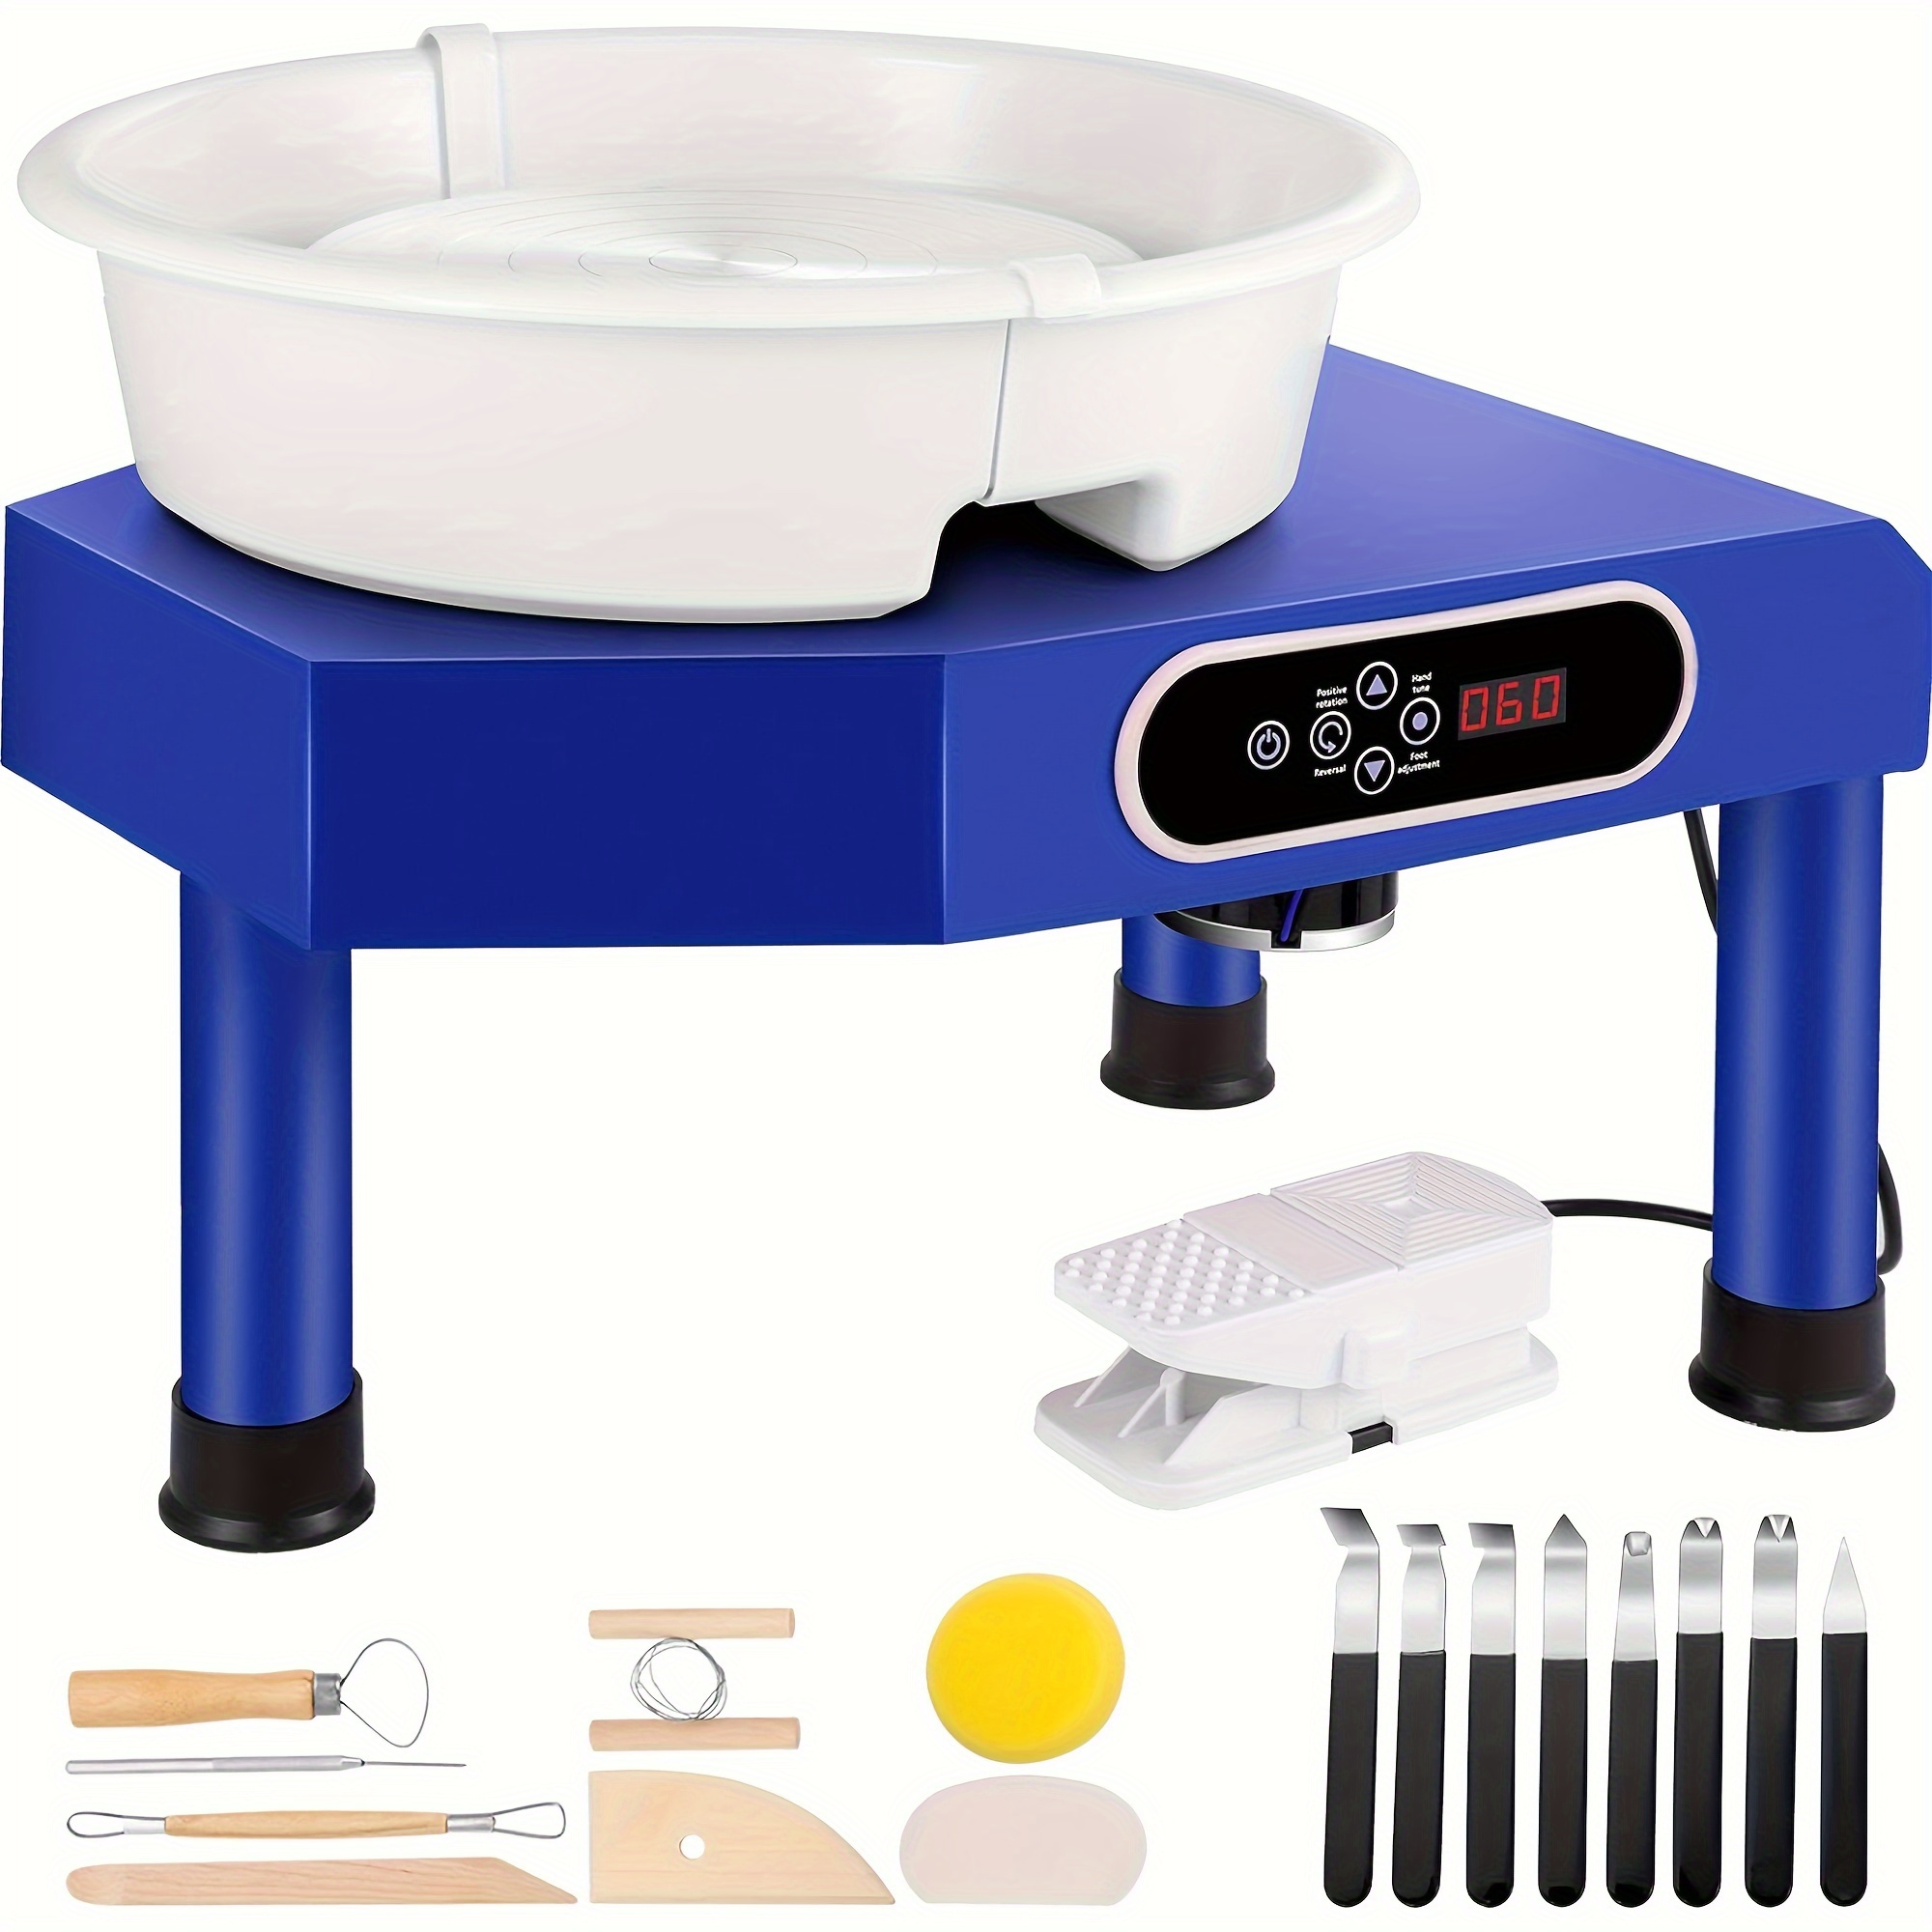 

Pottery Wheel, Pottery Forming Machine 9.8" Lcd Touch Screen, 350w Ceramic Pottery Electric Diy Clay Sculpting Tools, Foot Pedal & Detachable Abs Basin For Adults And Beginners Art Craft